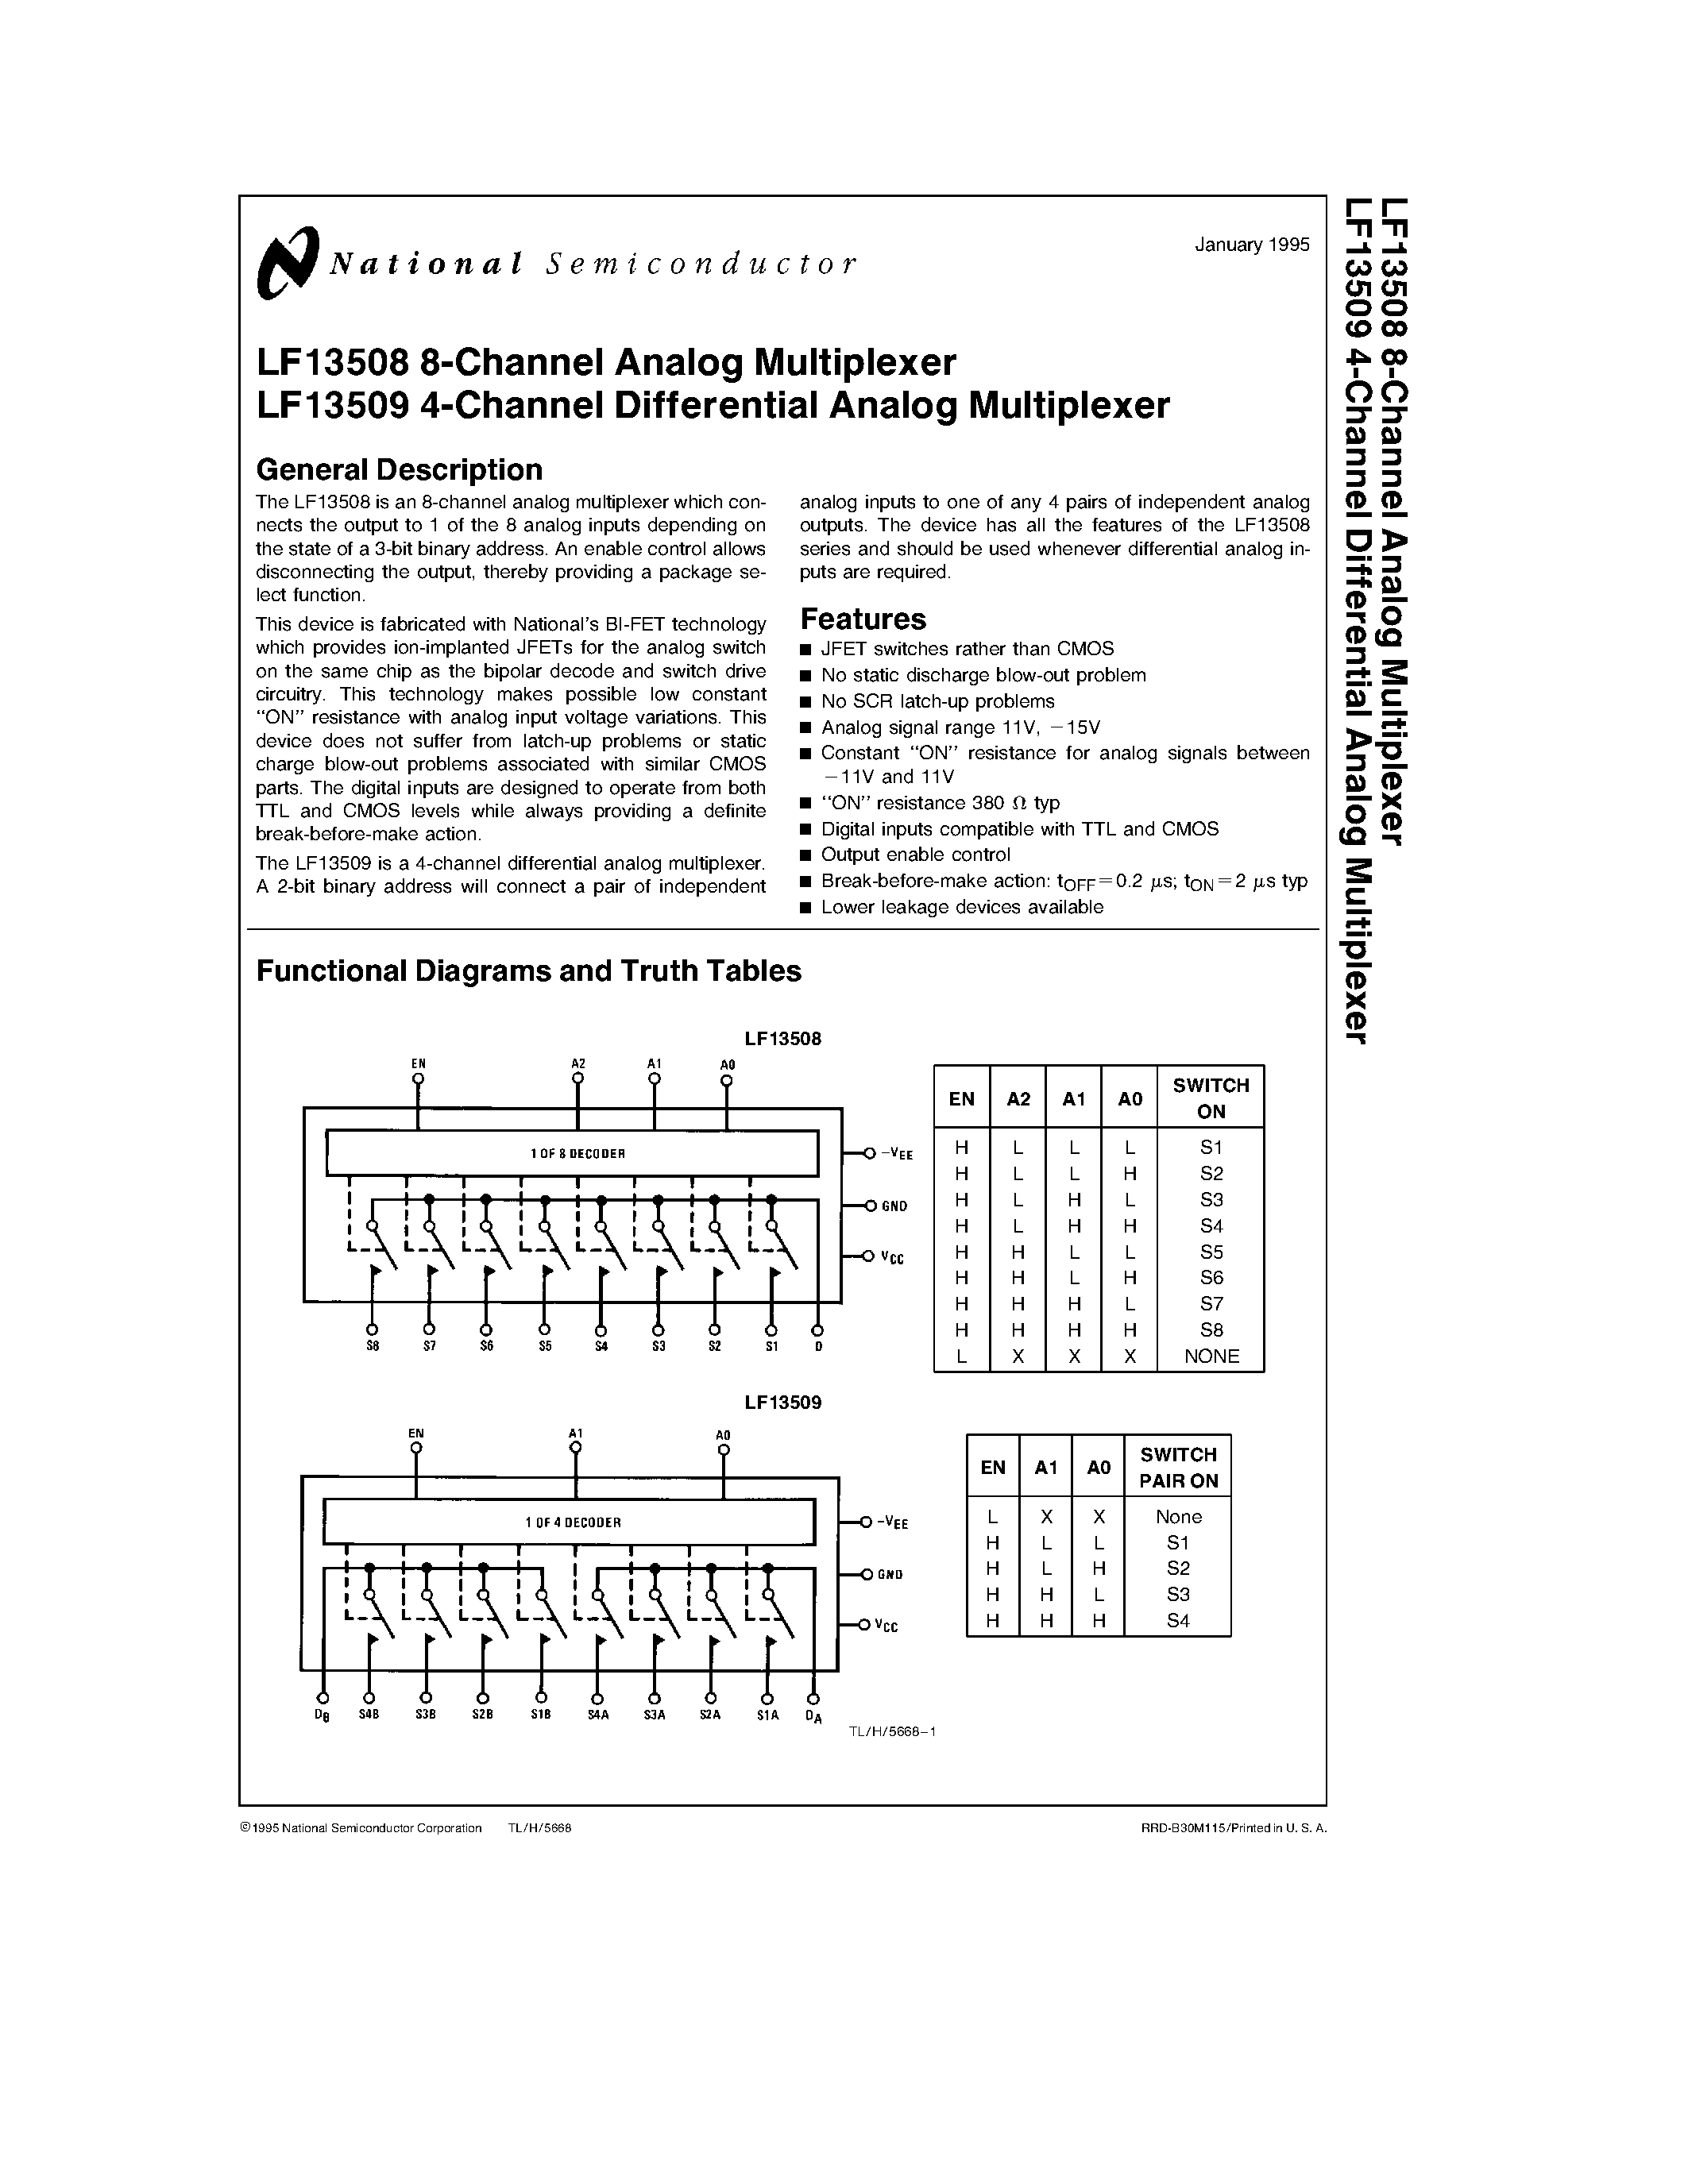 Datasheet LF13508 - (LF13508) 4-Channel Differential Analog Multiplexer page 1